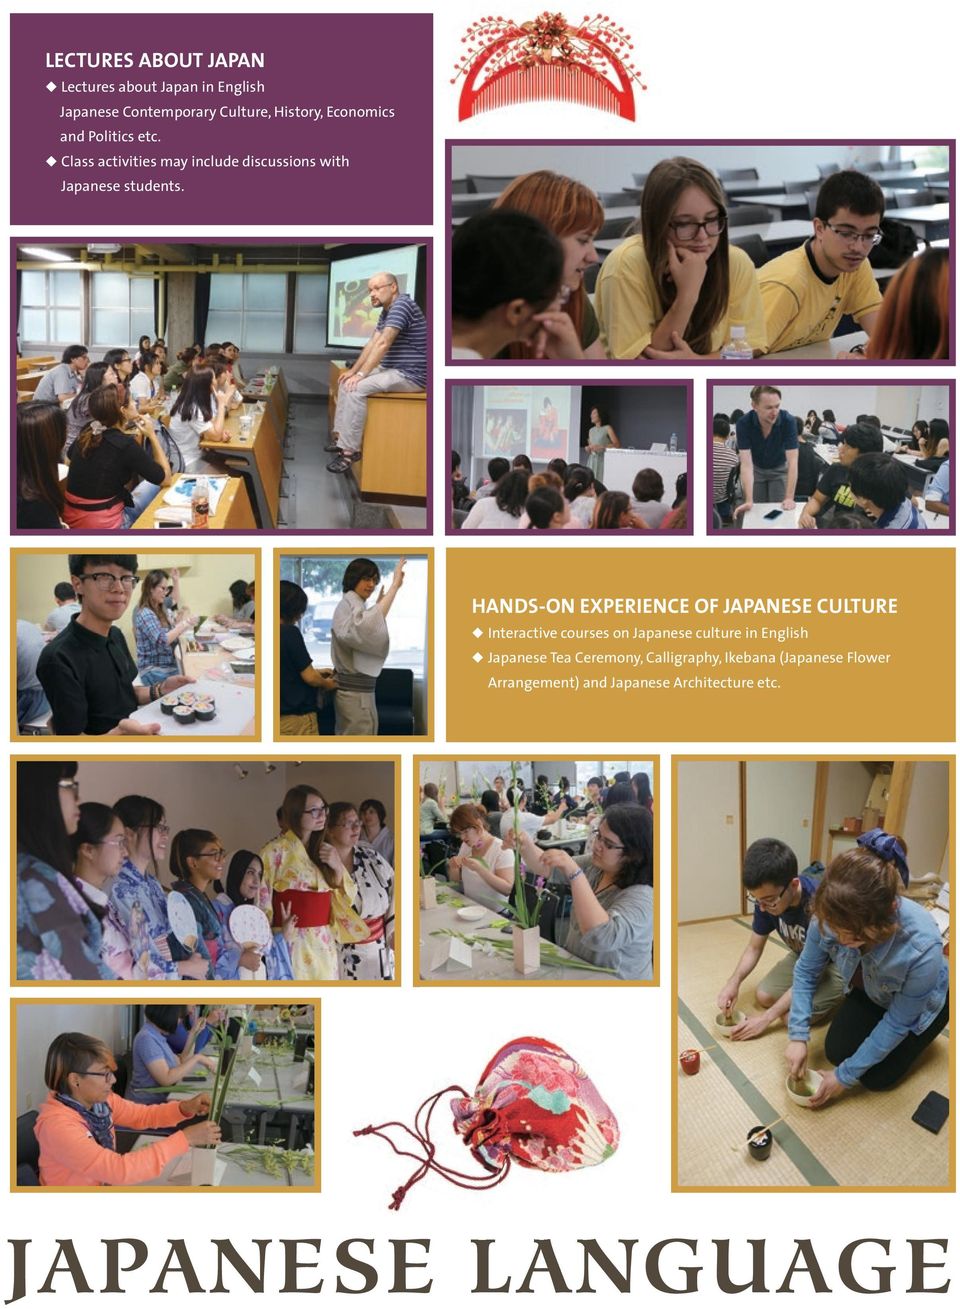 HANDS-ON EXPERIENCE OF JAPANESE CULTURE Interactive courses on Japanese culture in English Japanese